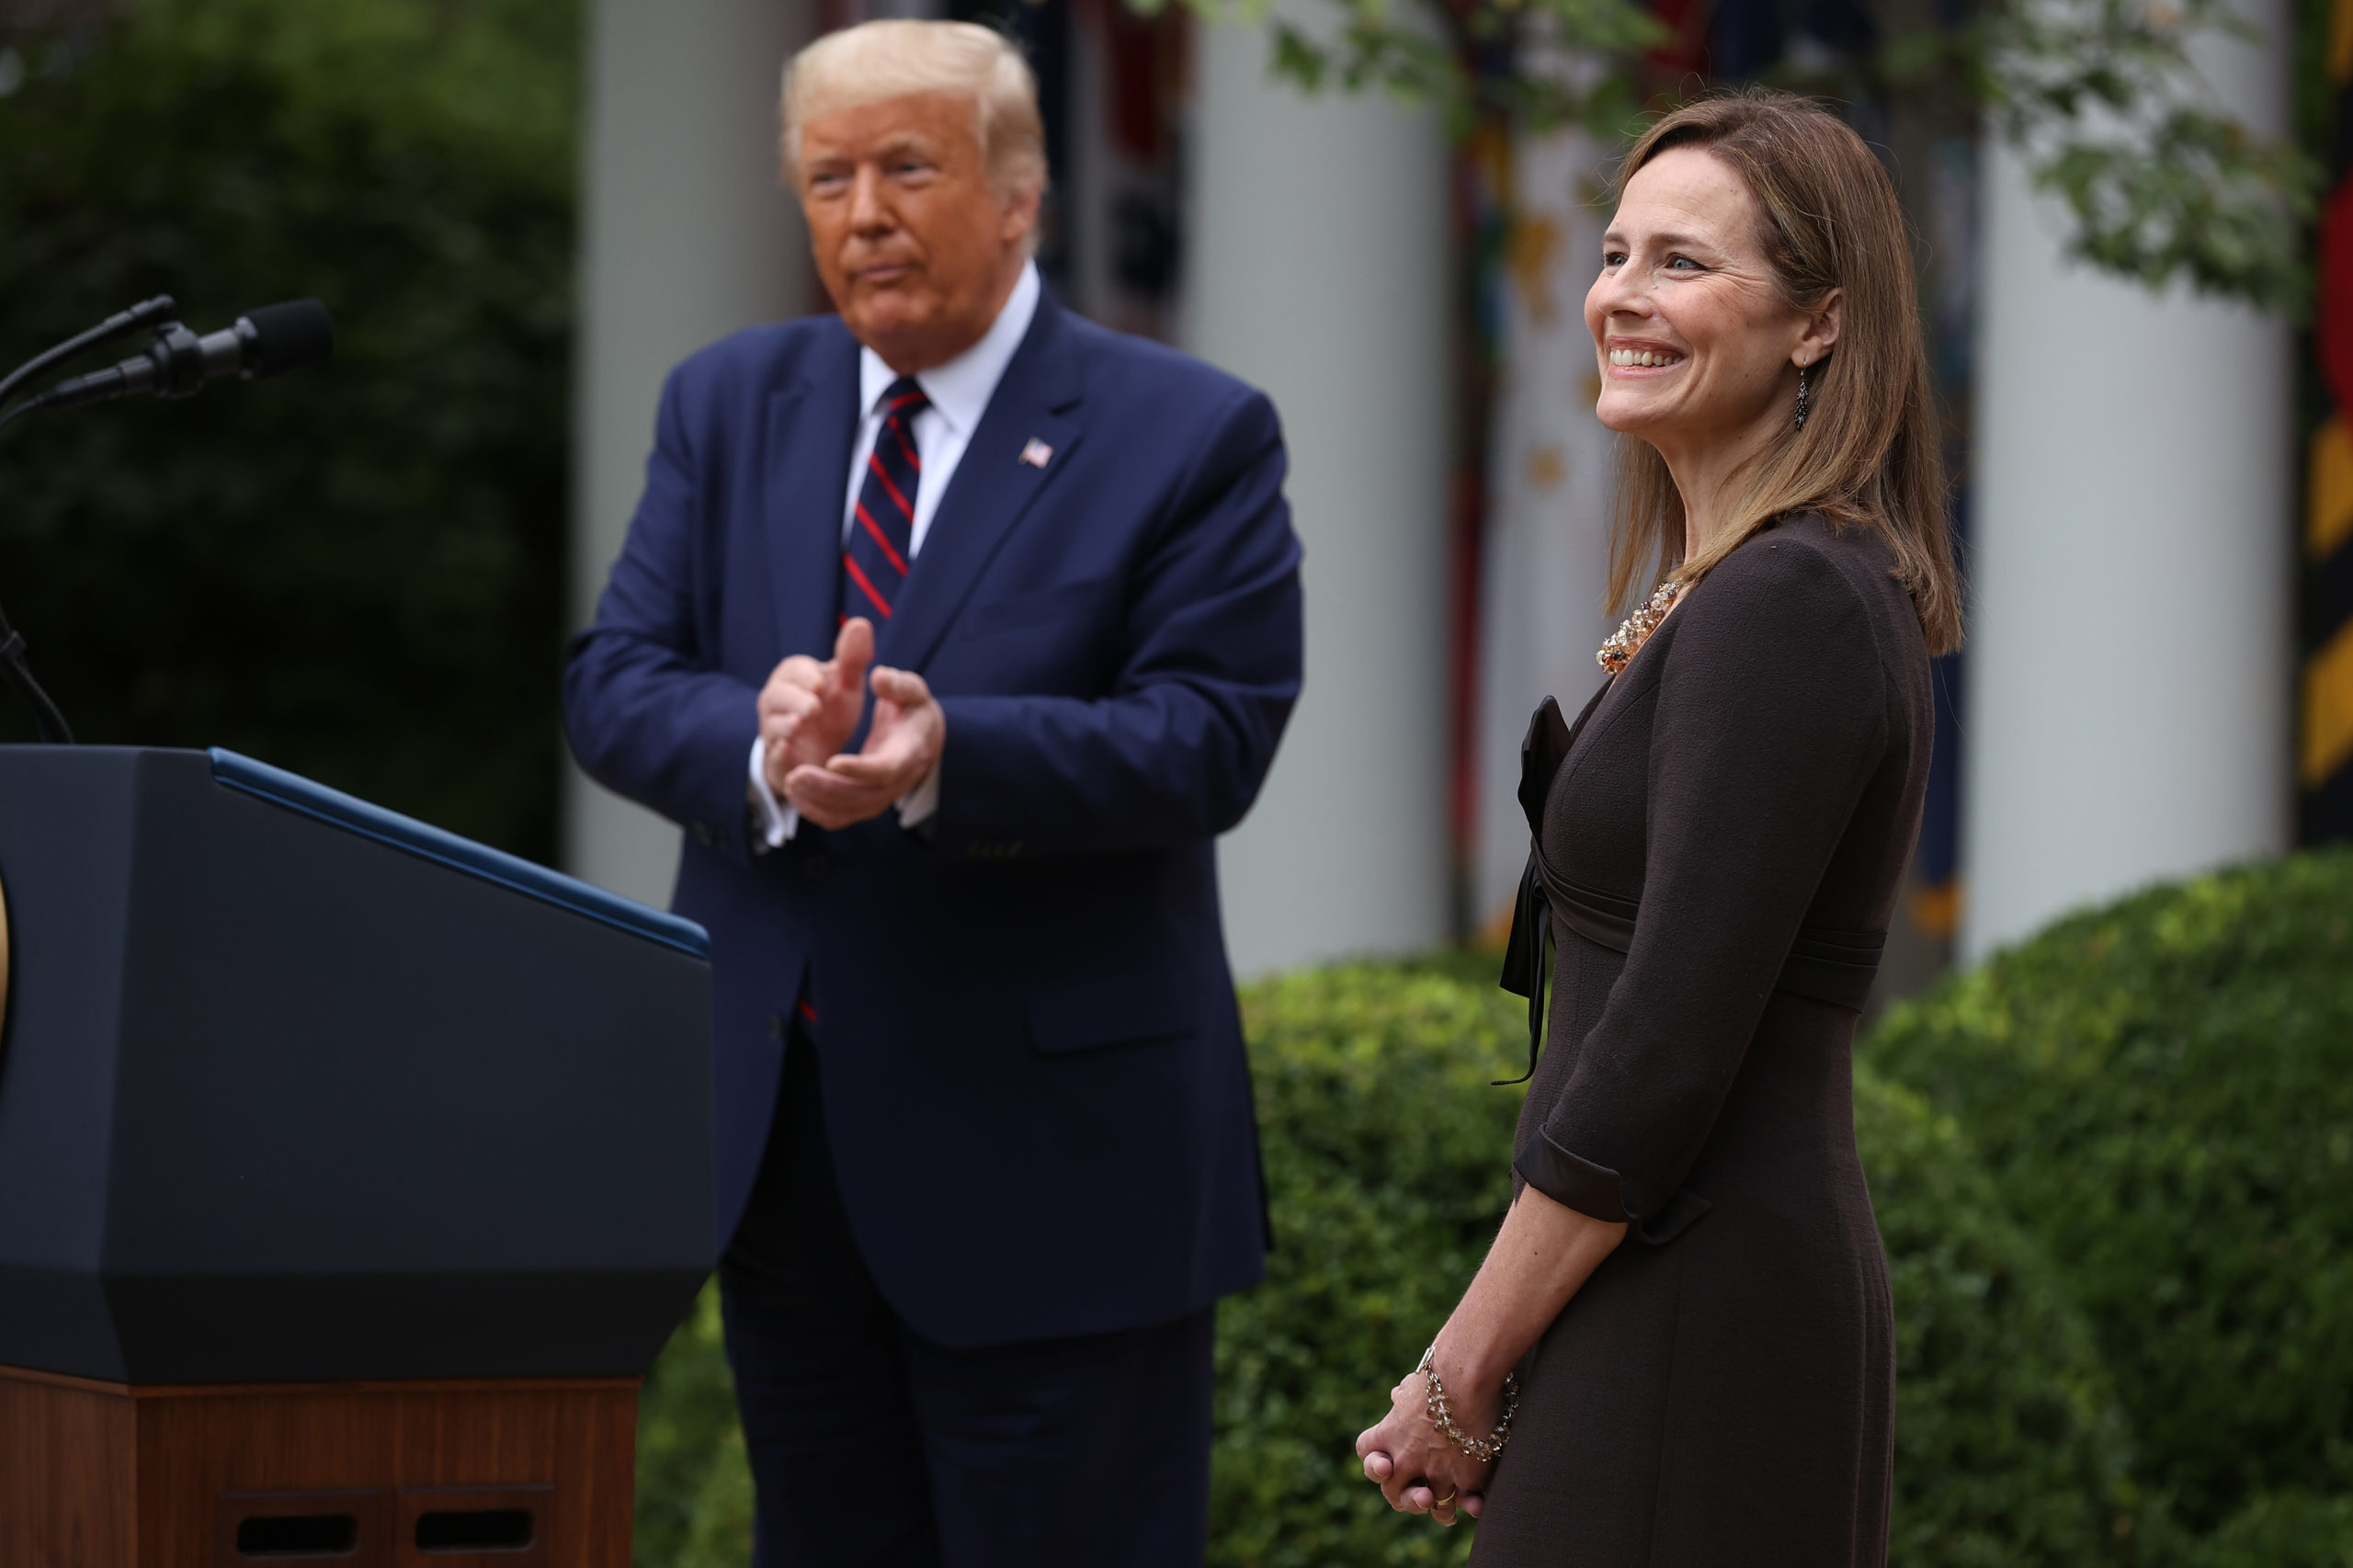 WASHINGTON, DC - SEPTEMBER 26: Seventh U.S. Circuit Court Judge Amy Coney Barrett smiles after U.S. President Donald Trump announced that she will be his nominee to the Supreme Court in the Rose Garden at the White House September 26, 2020 in Washington, DC. With 38 days until the election, Trump tapped Barrett to be his third Supreme Court nominee in just four years and to replace the late Associate Justice Ruth Bader Ginsburg, who will be buried at Arlington National Cemetery on Tuesday. (Photo by Chip Somodevilla/Getty Images)